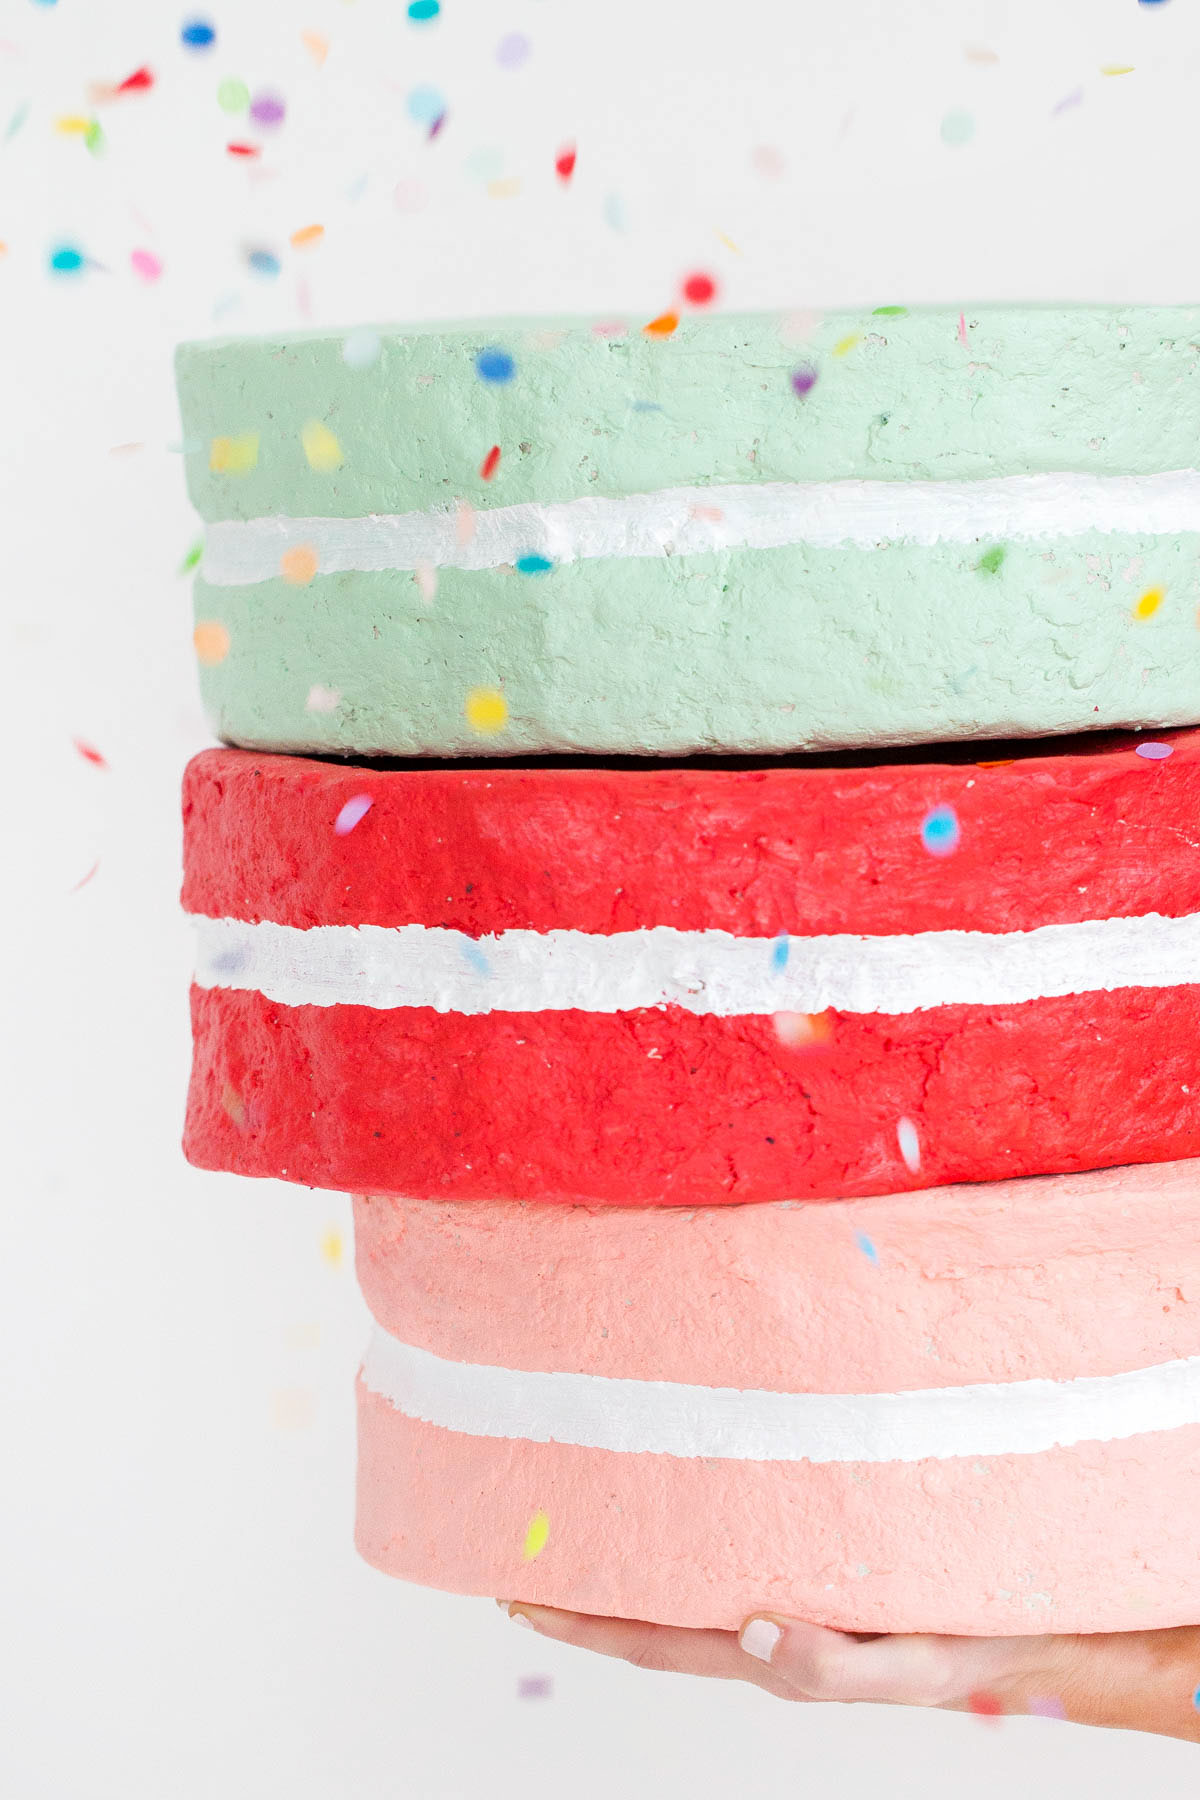 Jumbo DIY Paper Mache Macarons for the win! by lifestyle blogger Ashley Rose of Sugar & Cloth - Houston, TX